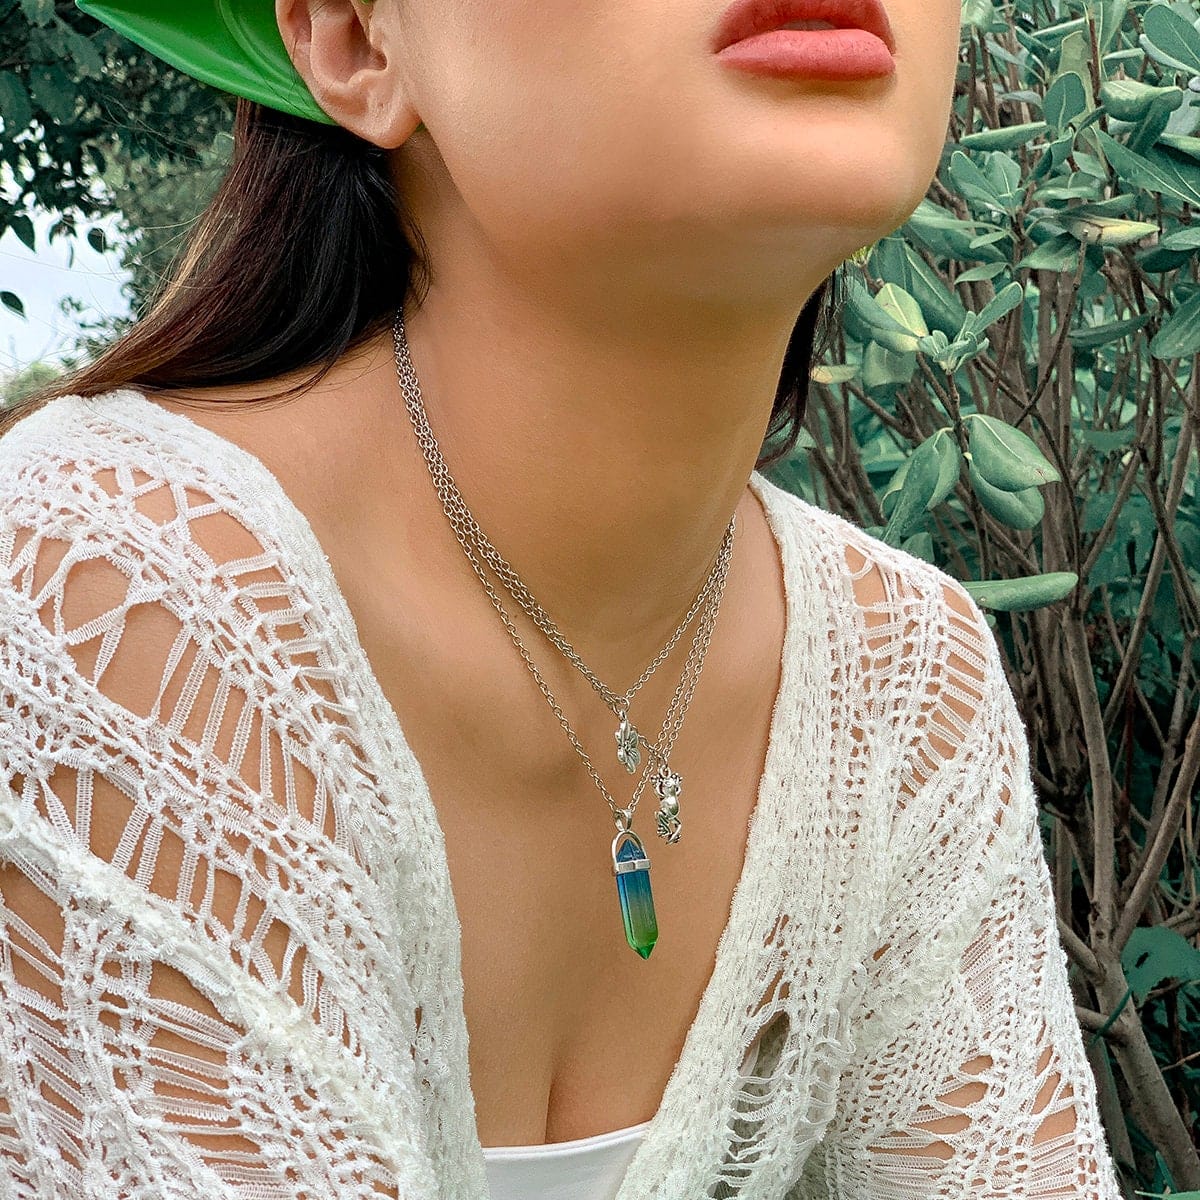 Boho Layered Healing Crystal Floral Frog Pendant Cable Chain Necklace Set - ArtGalleryZen